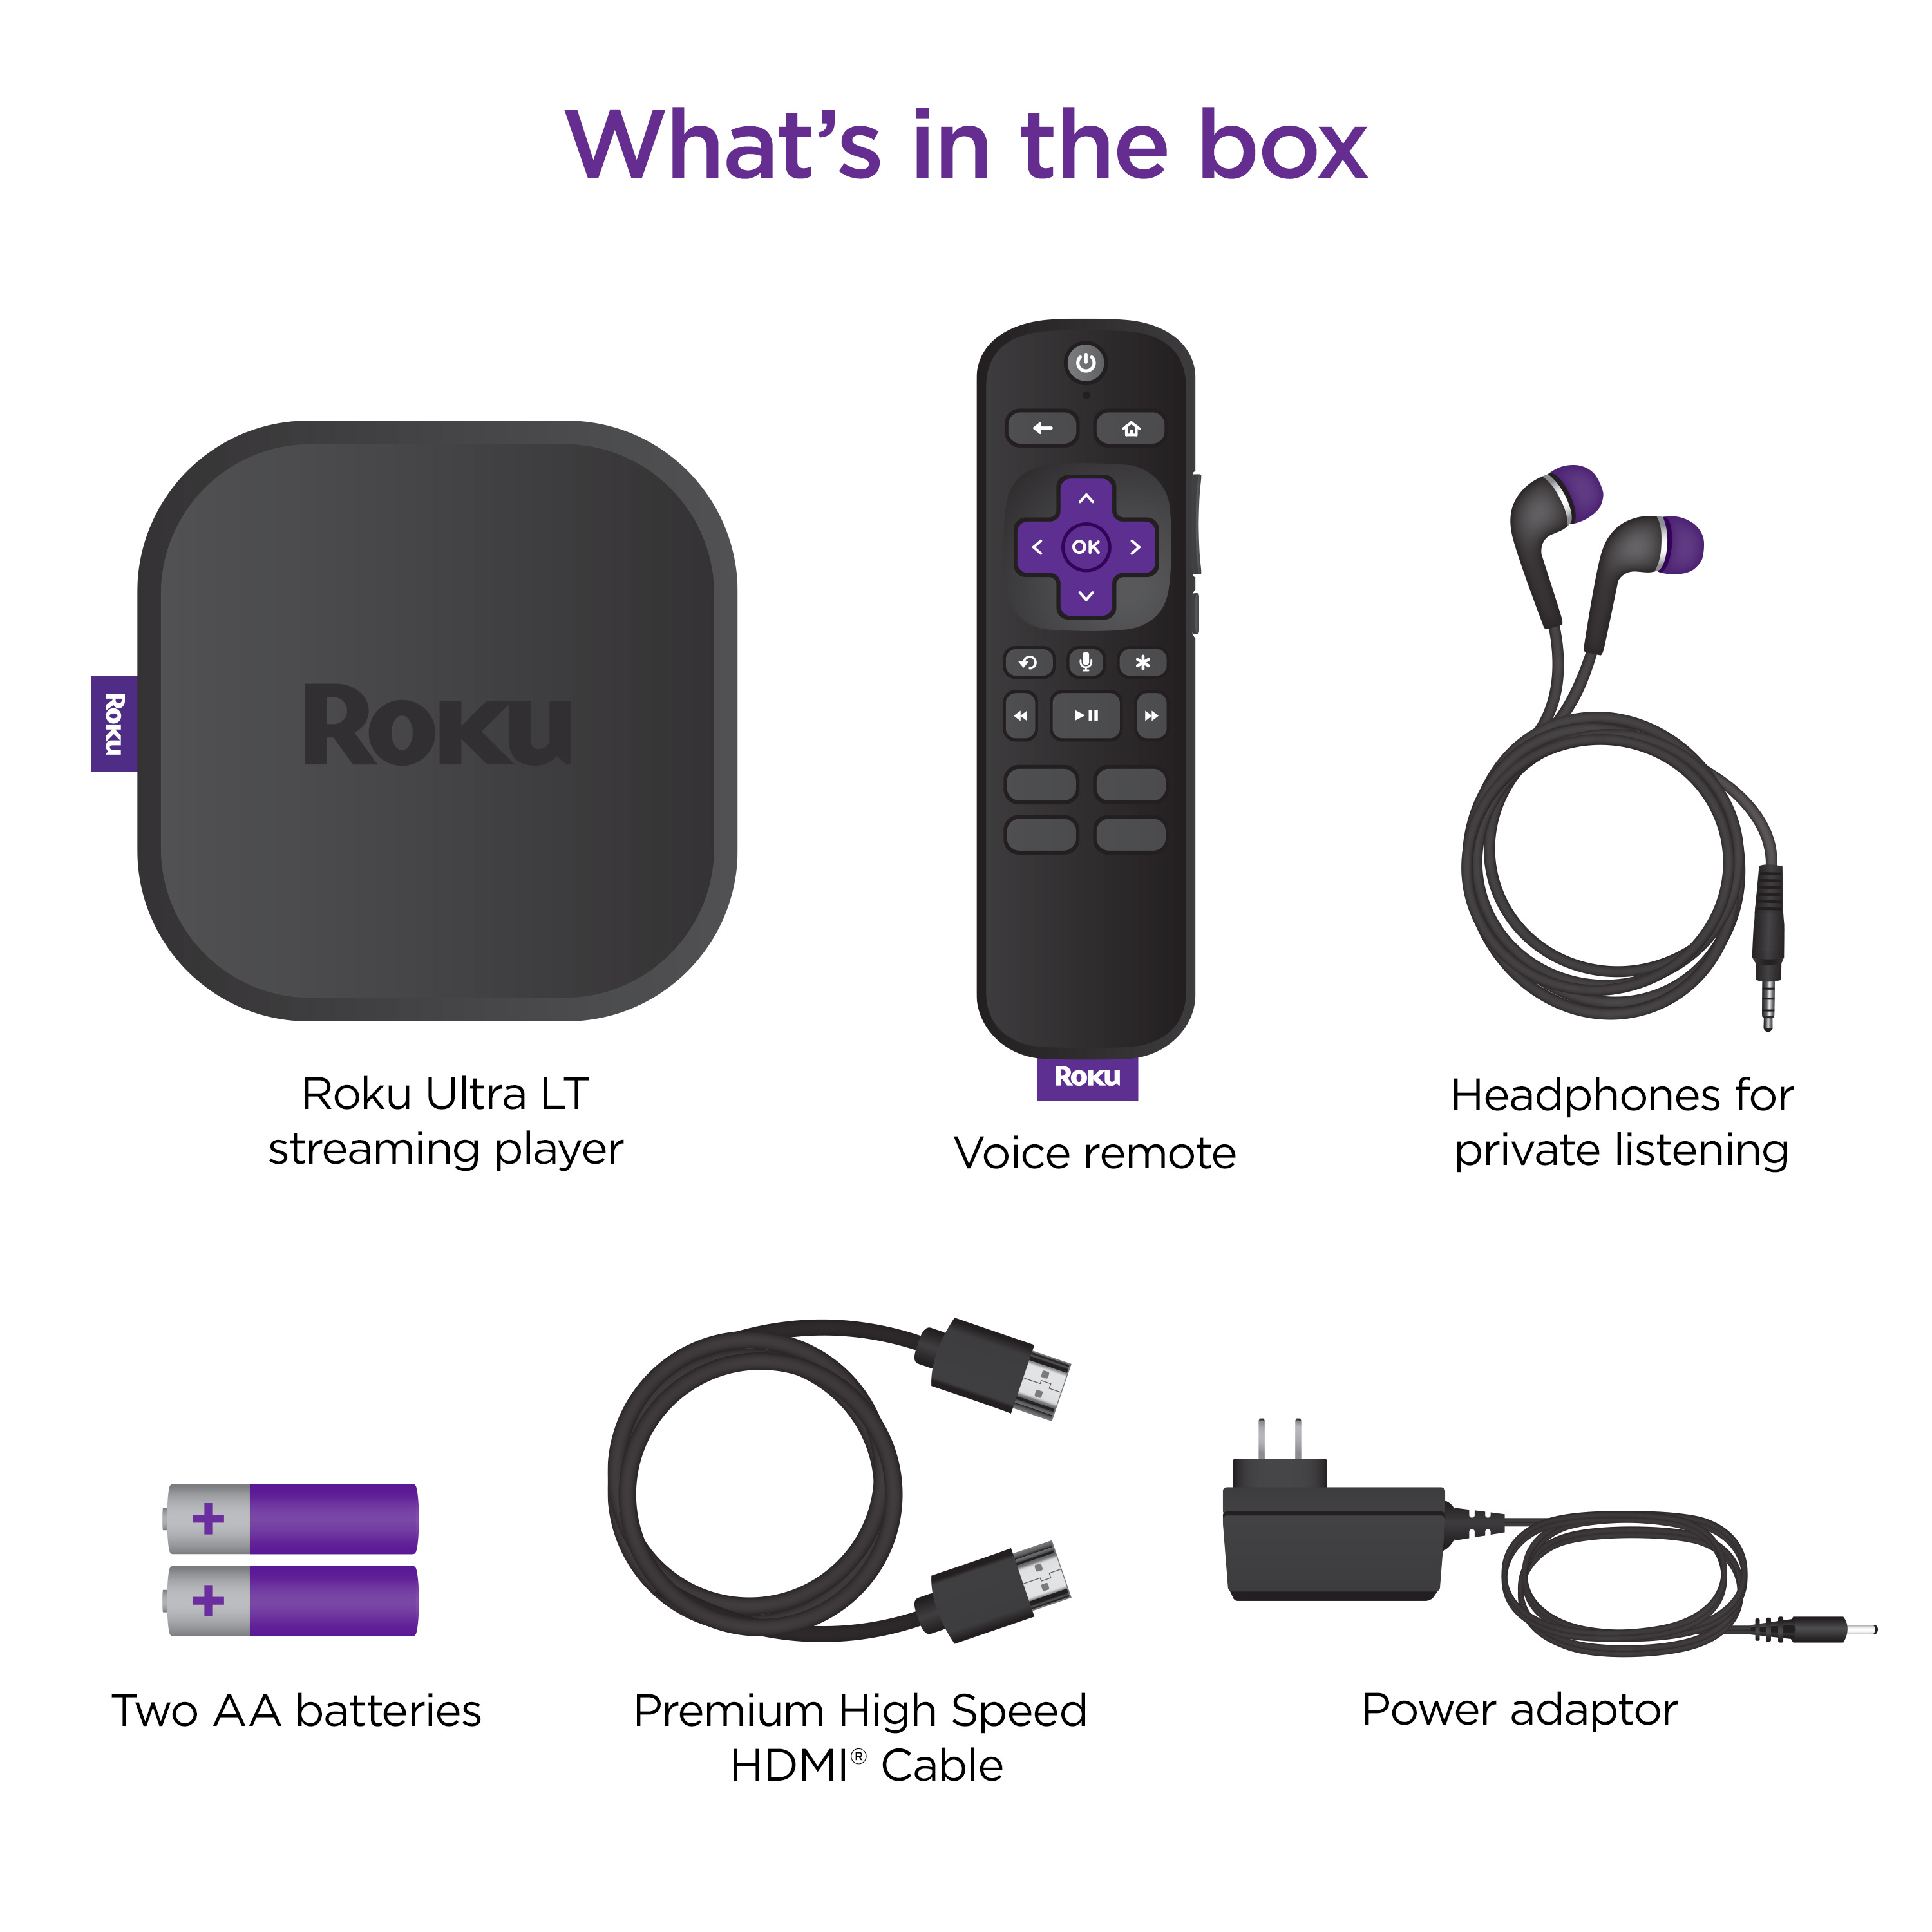 Roku Ultra LT Streaming Device 4K/HDR/Dolby Vision/Dual-Band Wi-Fi® with Roku Voice Remote and HDMI Cable - image 9 of 11